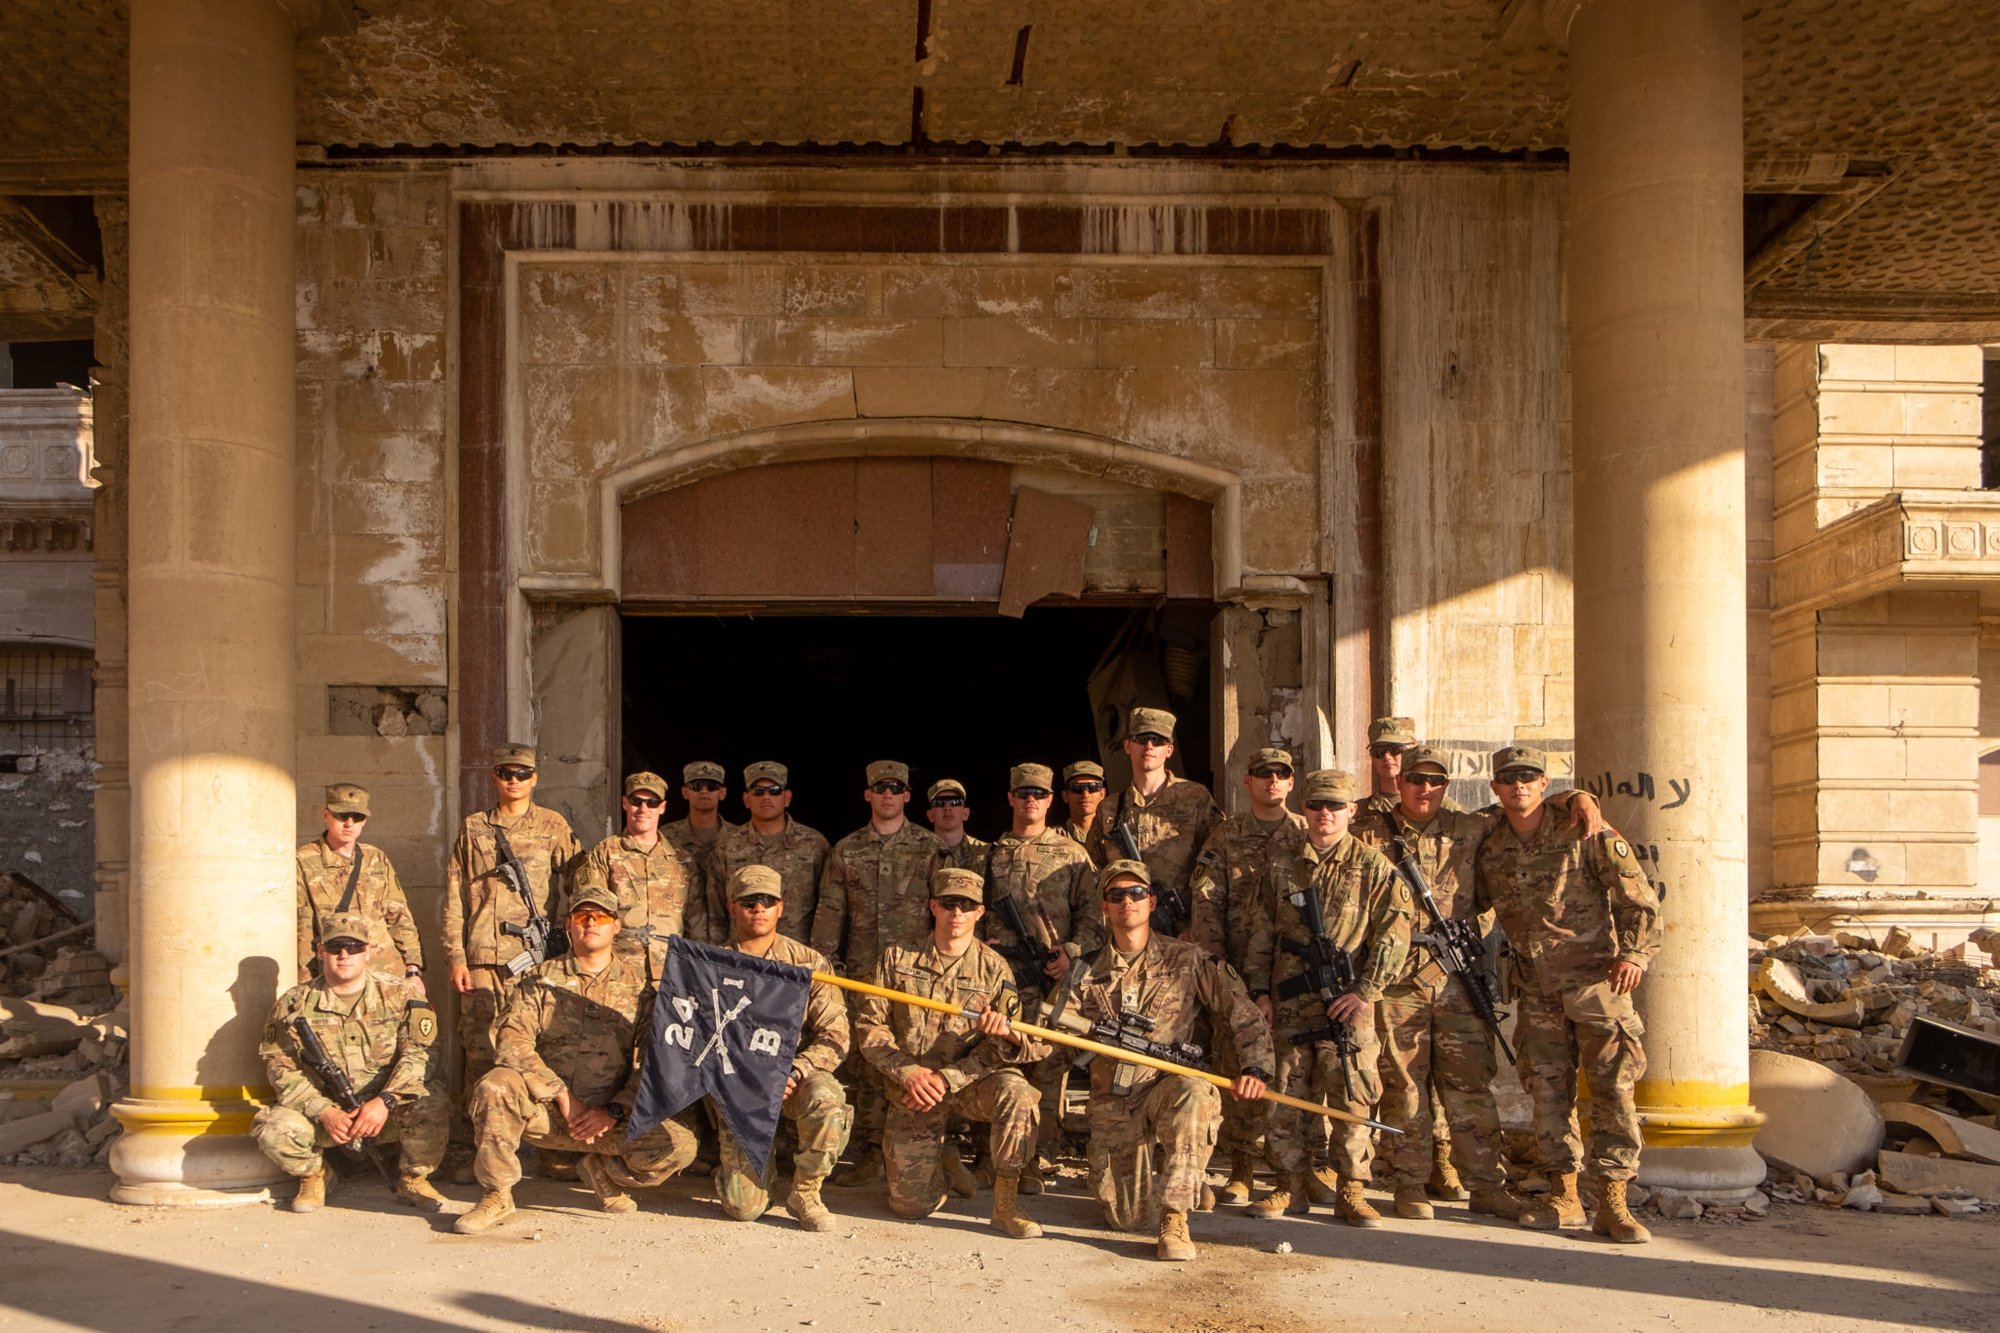 1-24 Barbarian Company before the entrance of Saddam’s palace. Photo by Kimberly Westenhiser/Coffee or Die.